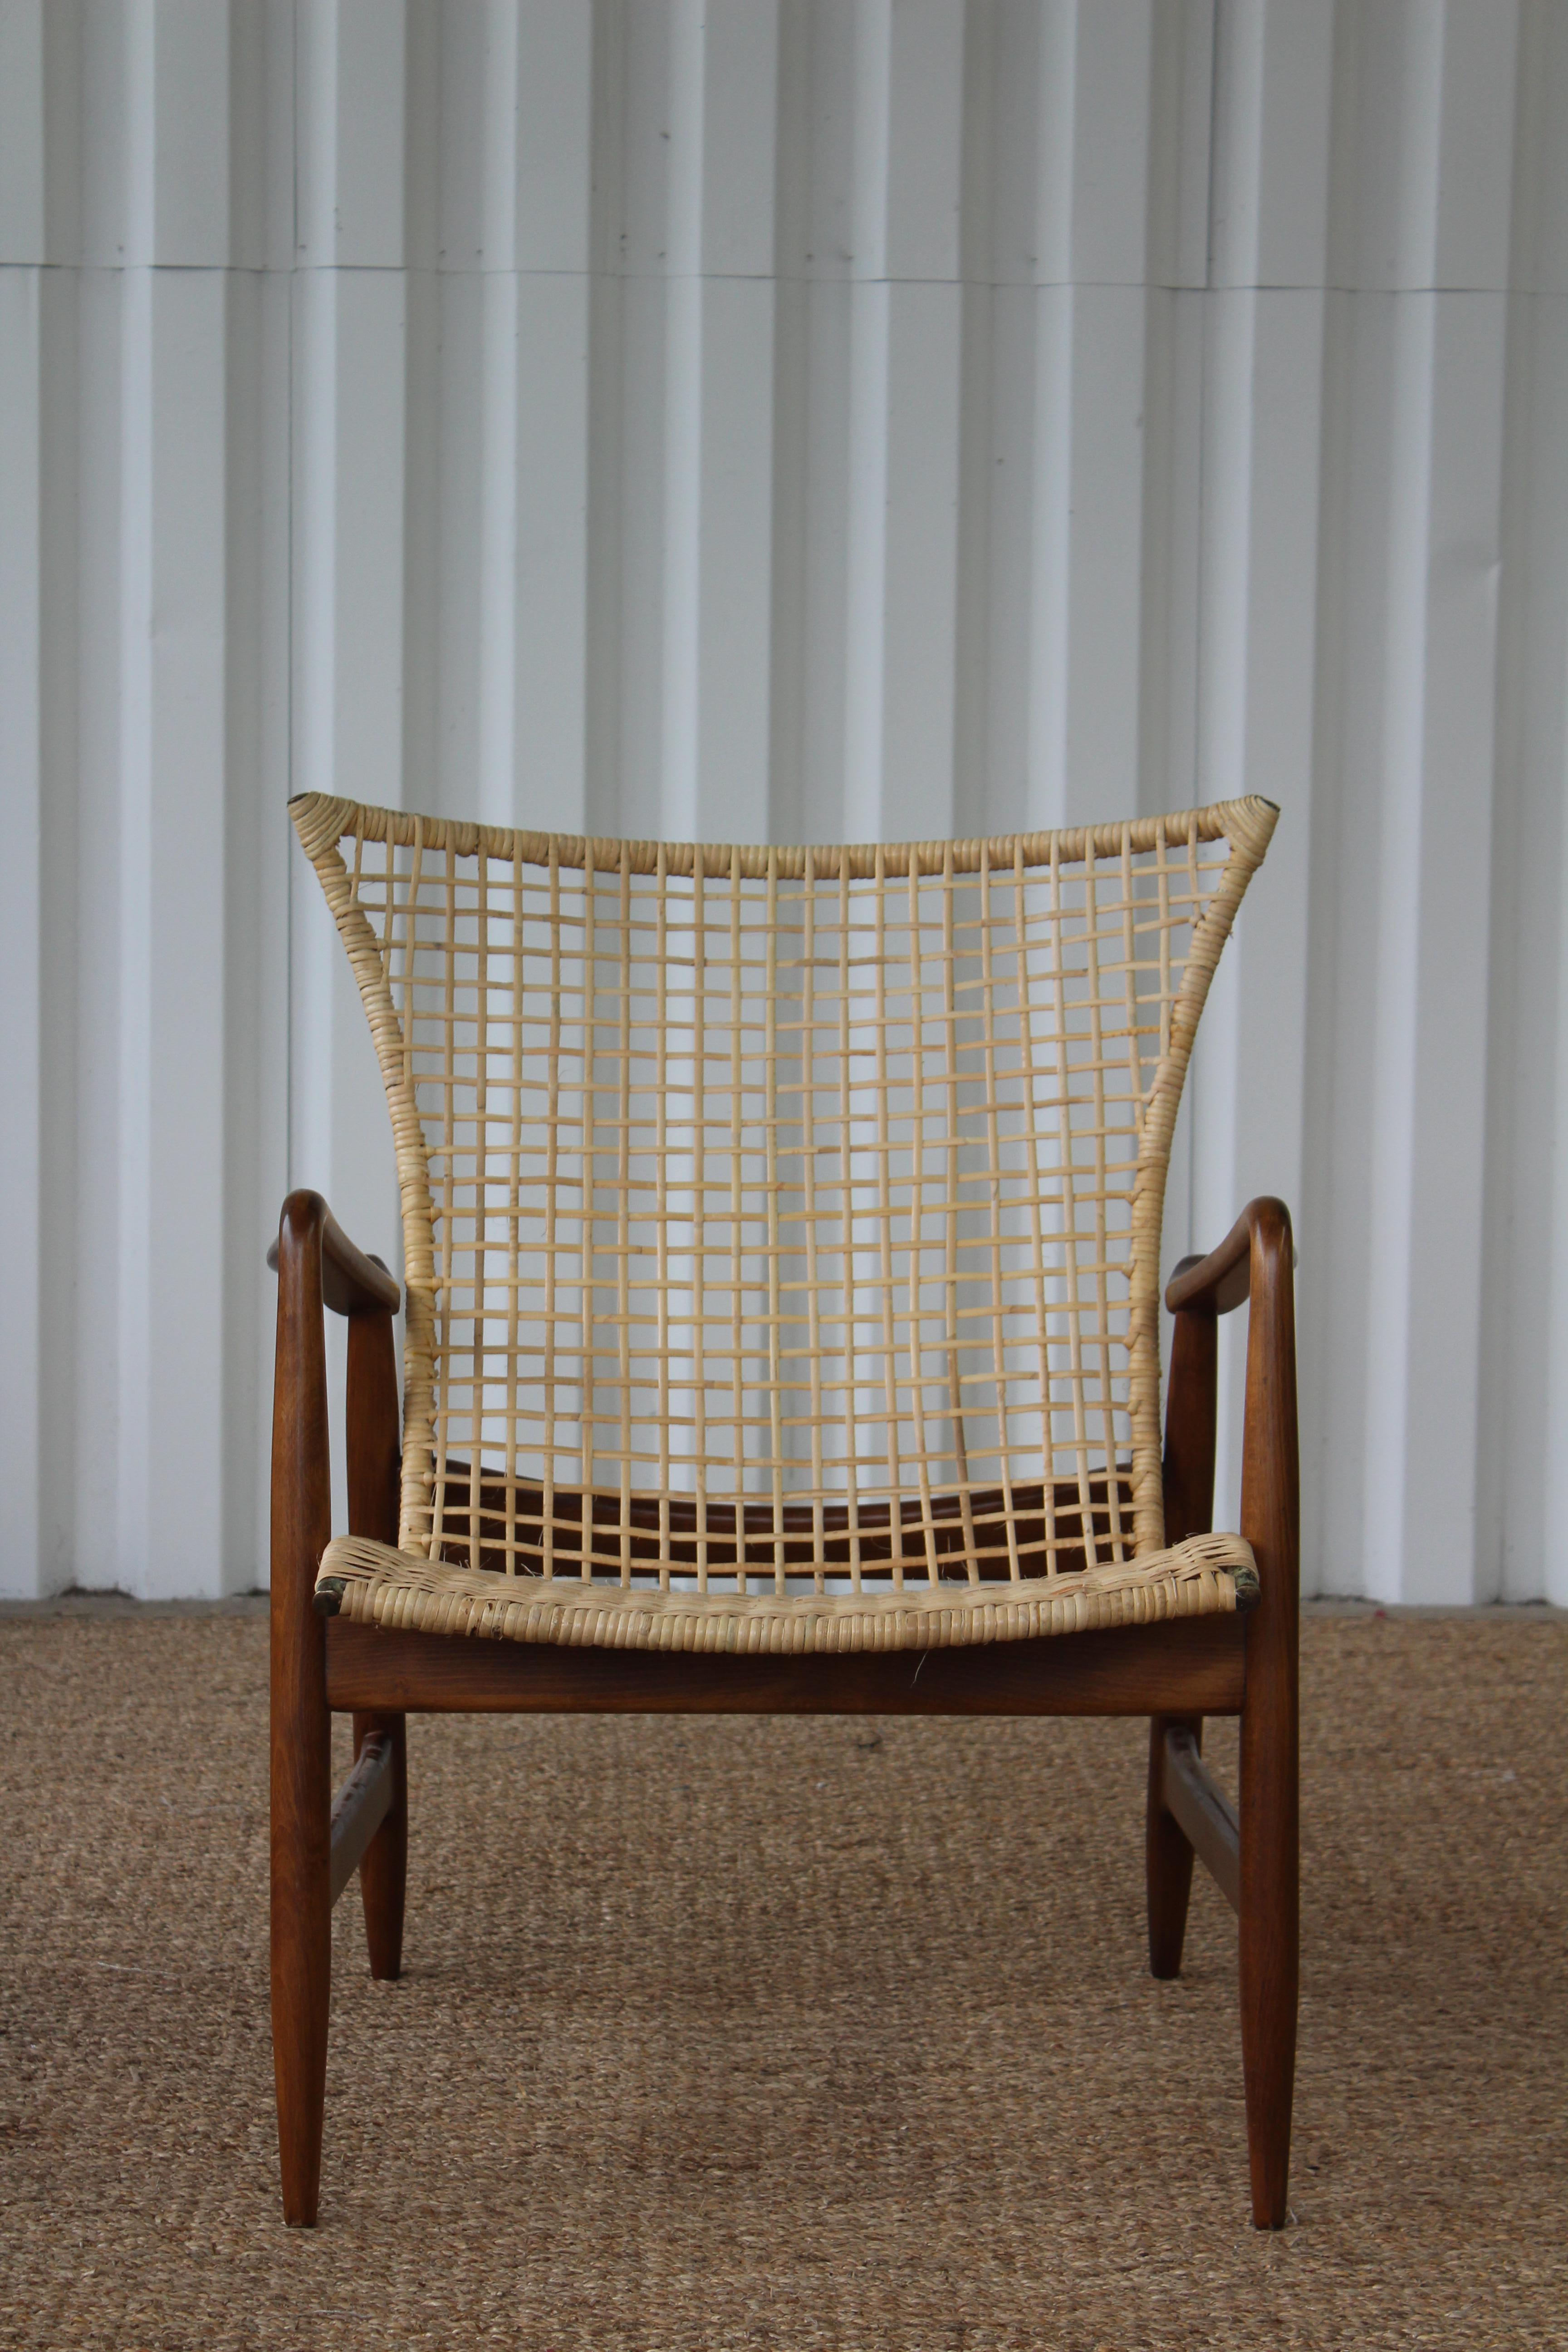 Beechwood and rattan lounge designed by Kofod-Larsen for Selig, Denmark, 1950s. Newly refinished frame and new rattan on the steel frame.